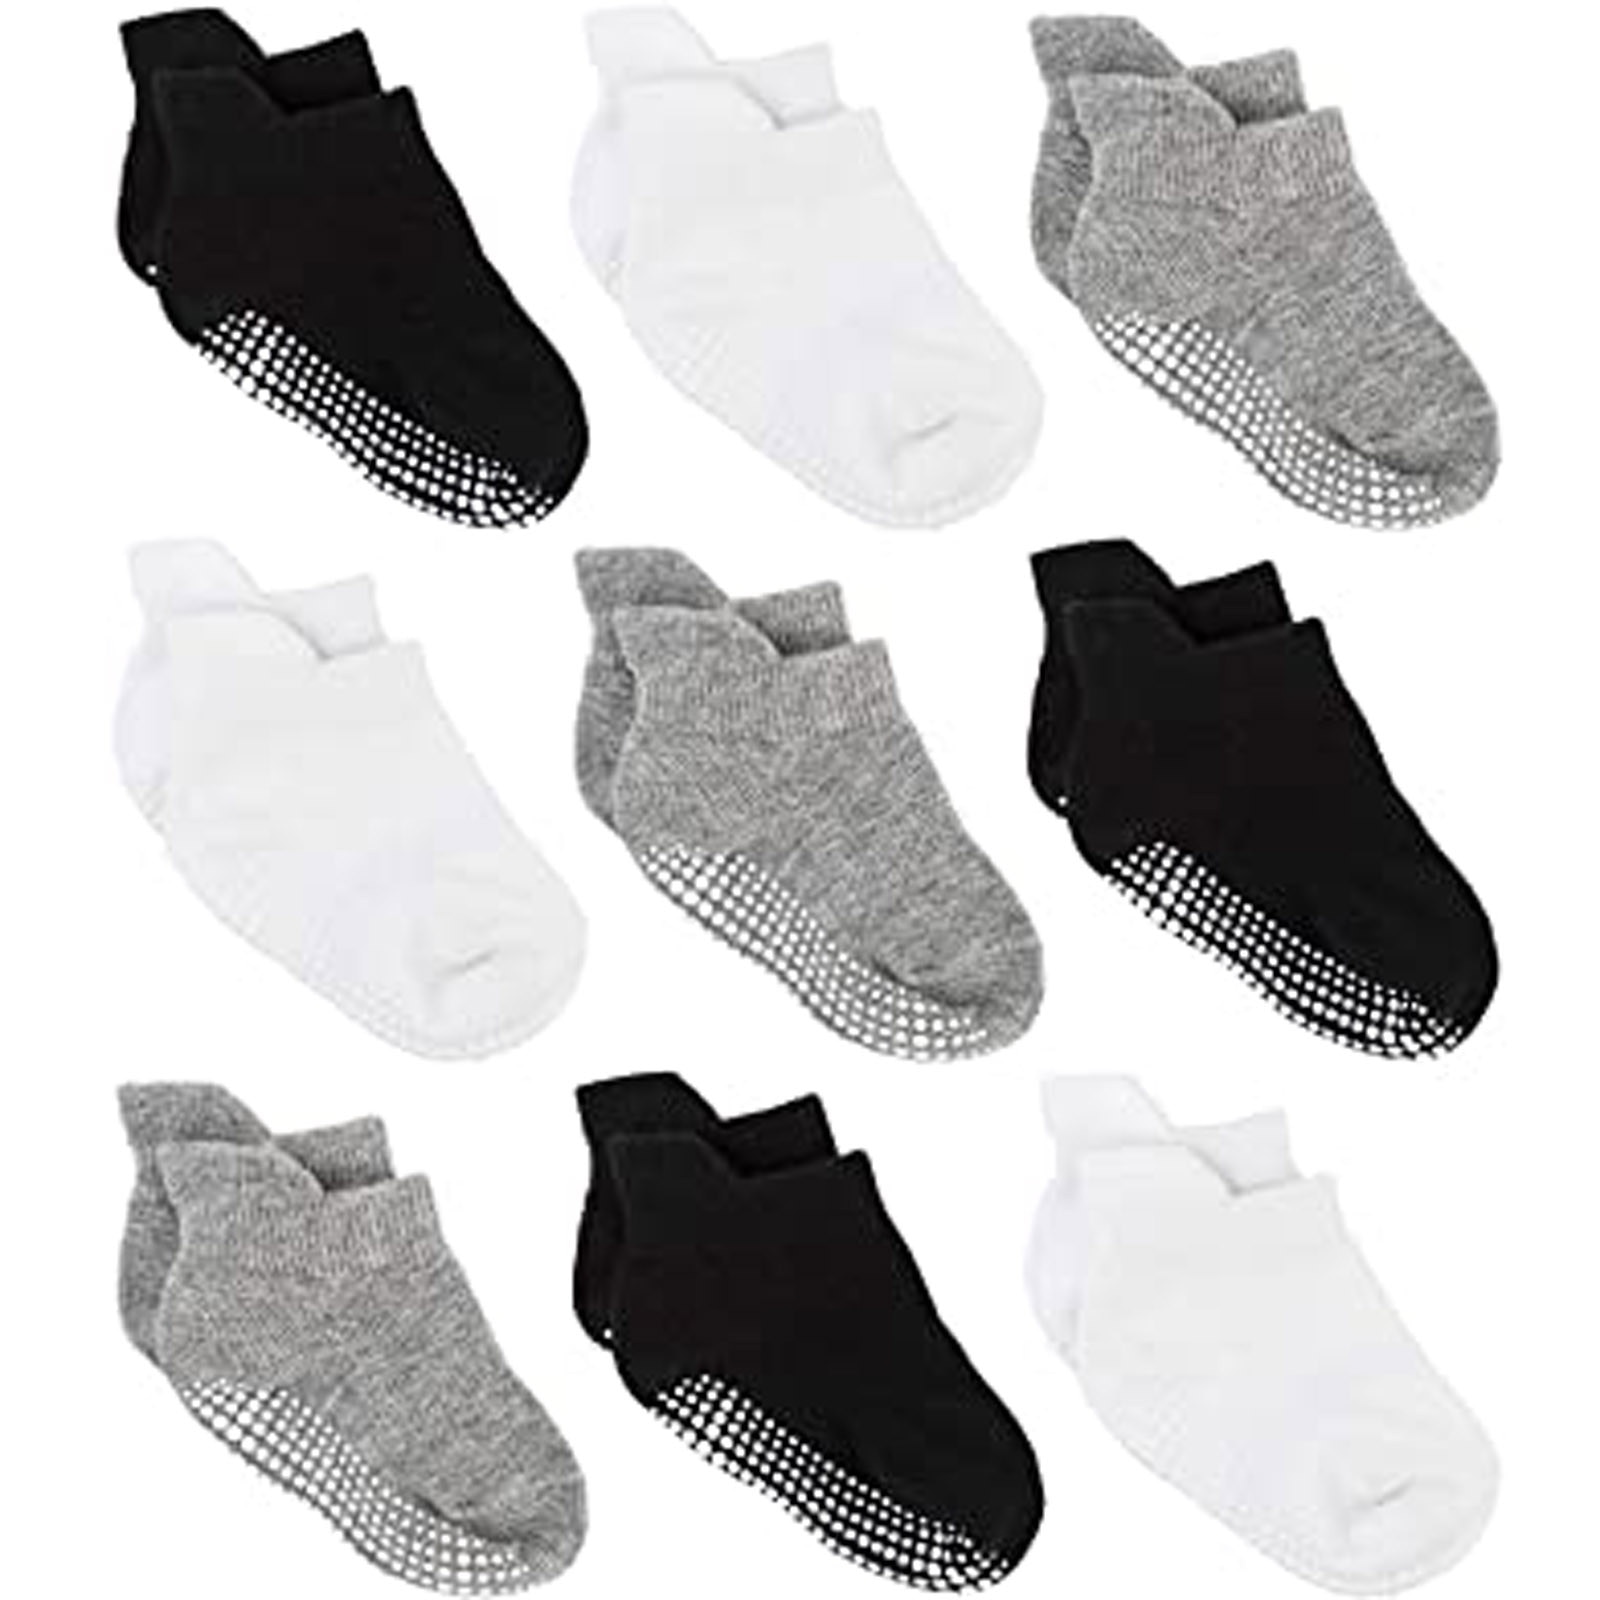 9 Pairs Baby Non Slip Grip Ankle SocksNon-slip Soles for Infants Toddlers Boy Socks 8 Years Old